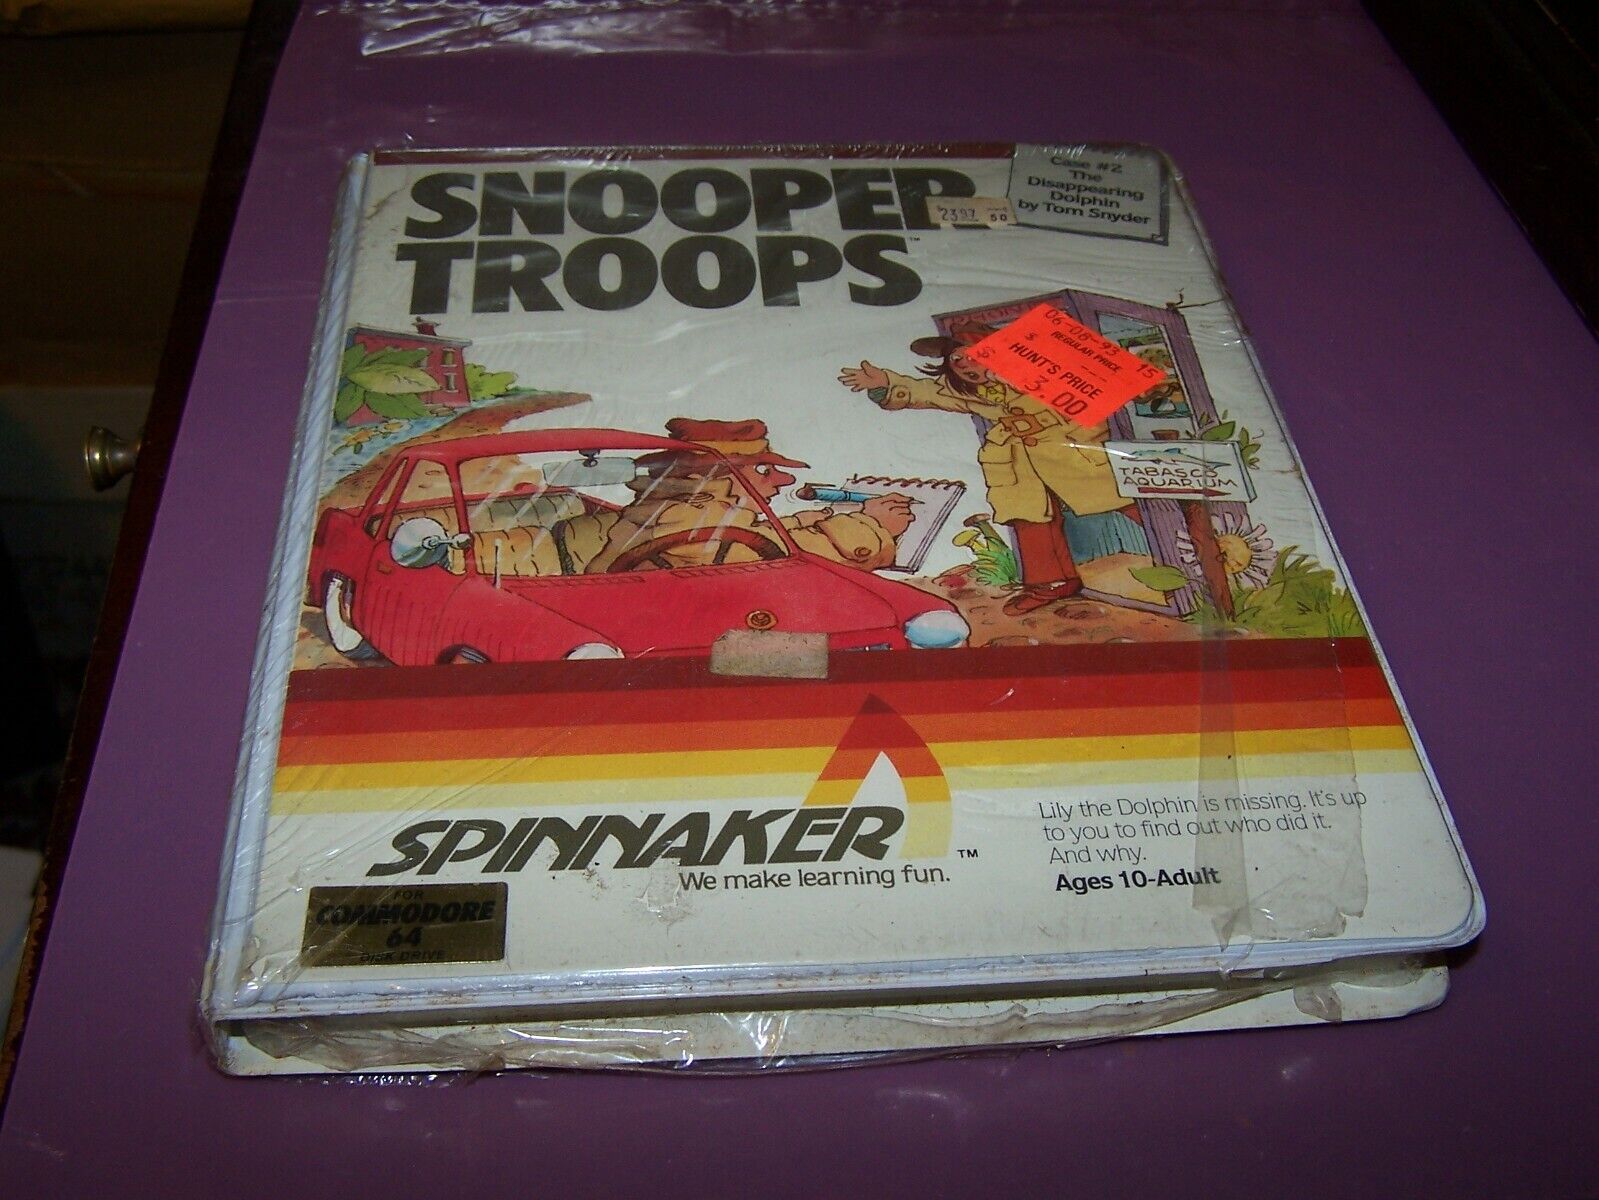 Clearance - Spinnaker Snooper Troops Game for Commodore 64 on 5,25 Disk